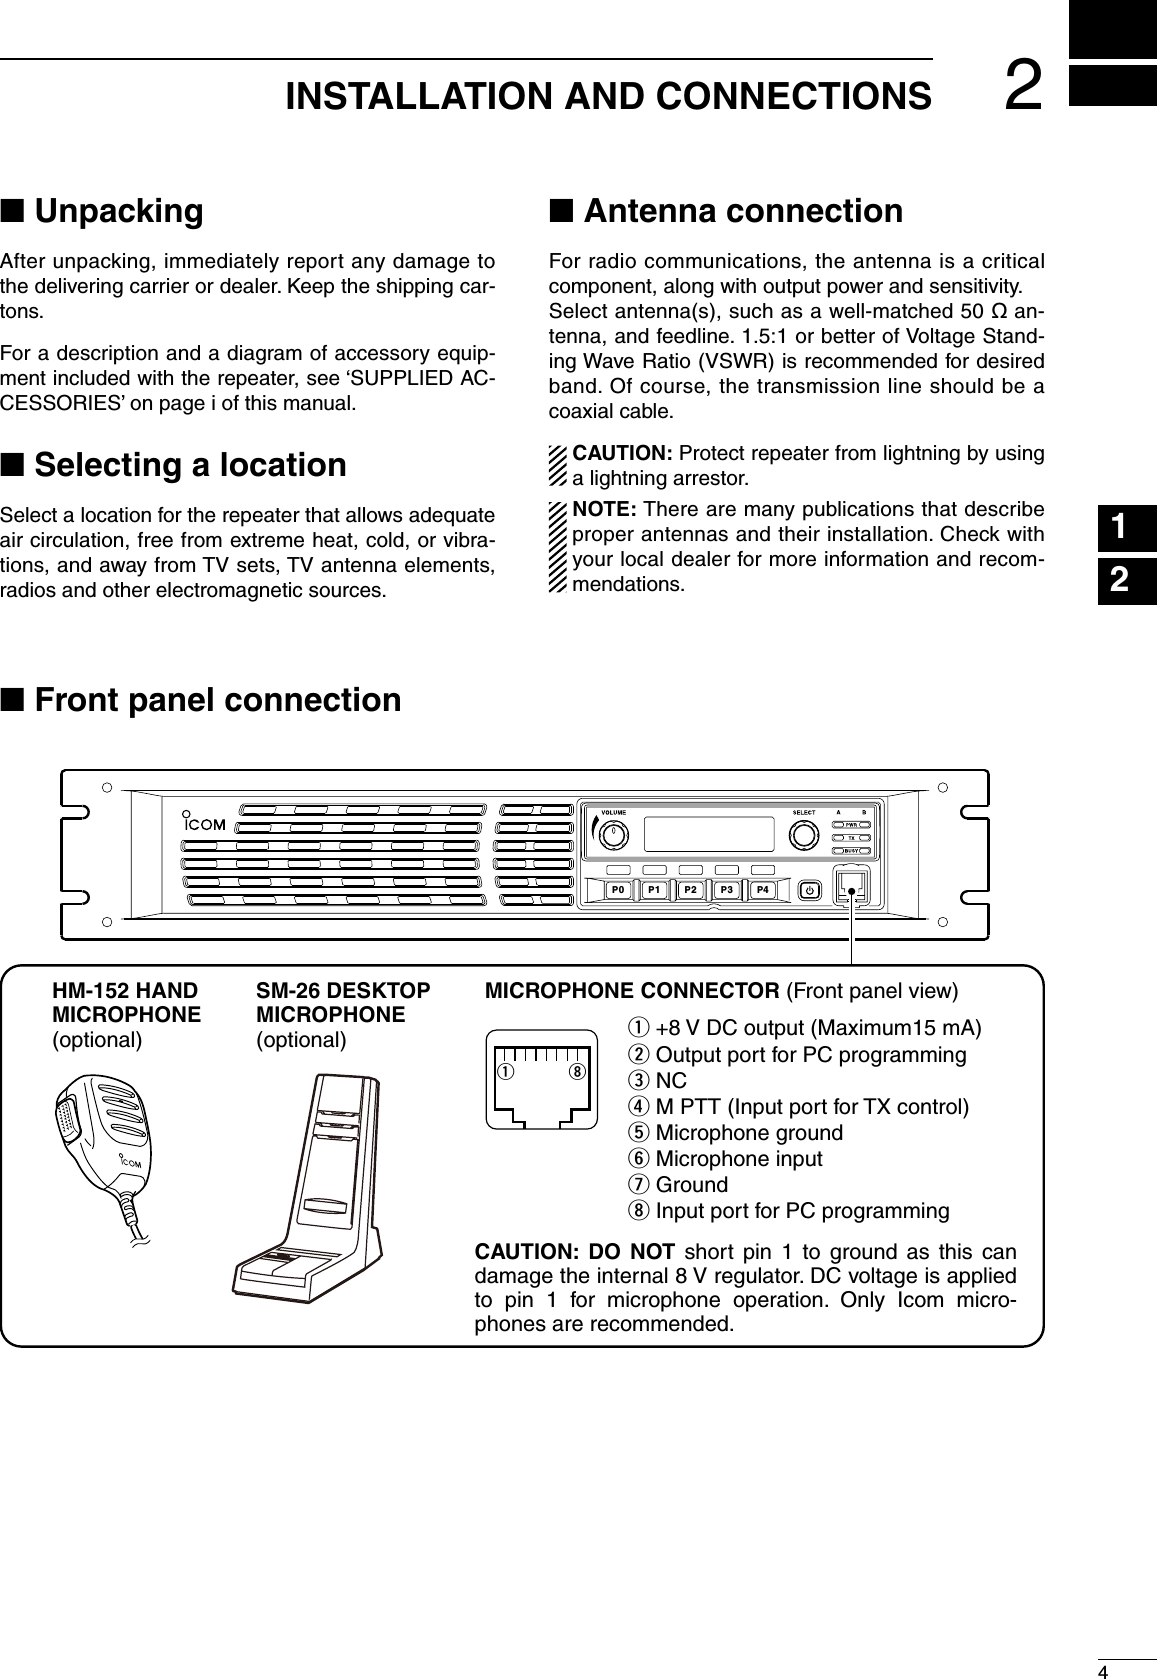 24INSTALLATION AND CONNECTIONSn UnpackingAfter unpacking, immediately report any damage to the delivering carrier or dealer. Keep the shipping car-tons.For a description and a diagram of accessory equip-ment included with the repeater, see ‘SUPPLIED AC-CESSORIES’ on page i of this manual.n Selecting a locationSelect a location for the repeater that allows adequate air circulation, free from extreme heat, cold, or vibra-tions, and away from TV sets, TV antenna elements, radios and other electromagnetic sources.n Antenna connectionFor radio communications, the antenna is a critical component, along with output power and sensitivity.Select antenna(s), such as a well-matched 50 ø an-tenna, and feedline. 1.5:1 or better of Voltage Stand-ing Wave Ratio (VSWR) is recommended for desired band. Of course, the transmission line should be a coaxial cable.  CAUTION: Protect repeater from lightning by using a lightning arrestor.  NOTE: There are many publications that describe proper antennas and their installation. Check with your local dealer for more information and recom-mendations.123456789101112131415161718192021n Front panel connectionP0P1P2P3P4SM-26 DESKTOP MICROPHONE (optional)MICROPHONE CONNECTOR (Front panel view)HM-152 HAND MICROPHONE(optional)qiCAUTION:  DO  NOT  short  pin  1  to  ground  as  this  can damage the internal 8 V regulator. DC voltage is applied to  pin  1  for  microphone  operation.  Only  Icom  micro-phones are recommended.q +8 V DC output (Maximum15 mA)w Output port for PC programminge NCr M PTT (Input port for TX control)t Microphone groundy Microphone inputu Groundi Input port for PC programming